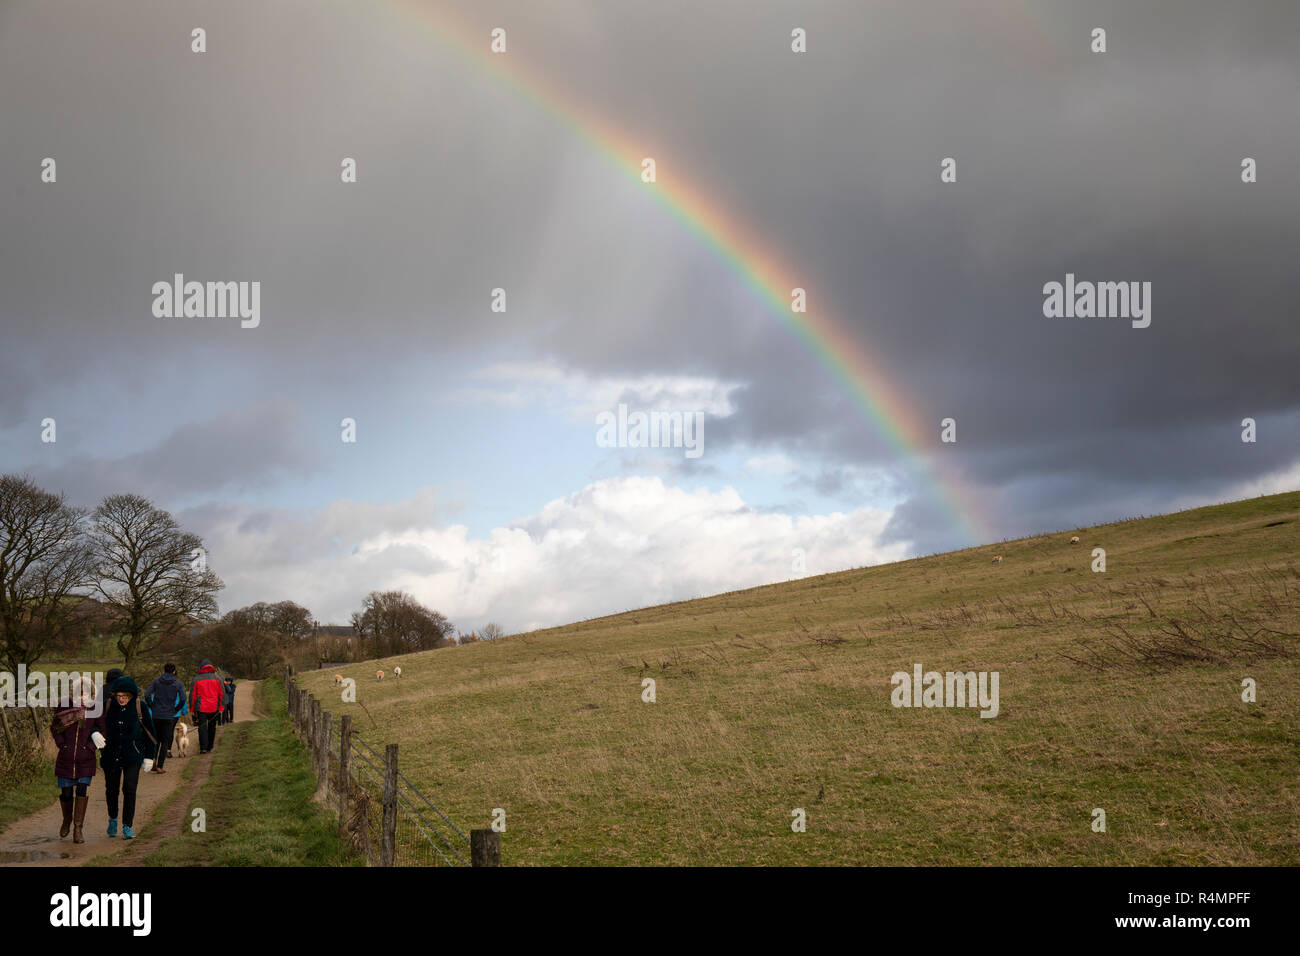 Rainbow at Tegg's Nose Country Park, Macclesfield, Cheshire, England, UK Stock Photo